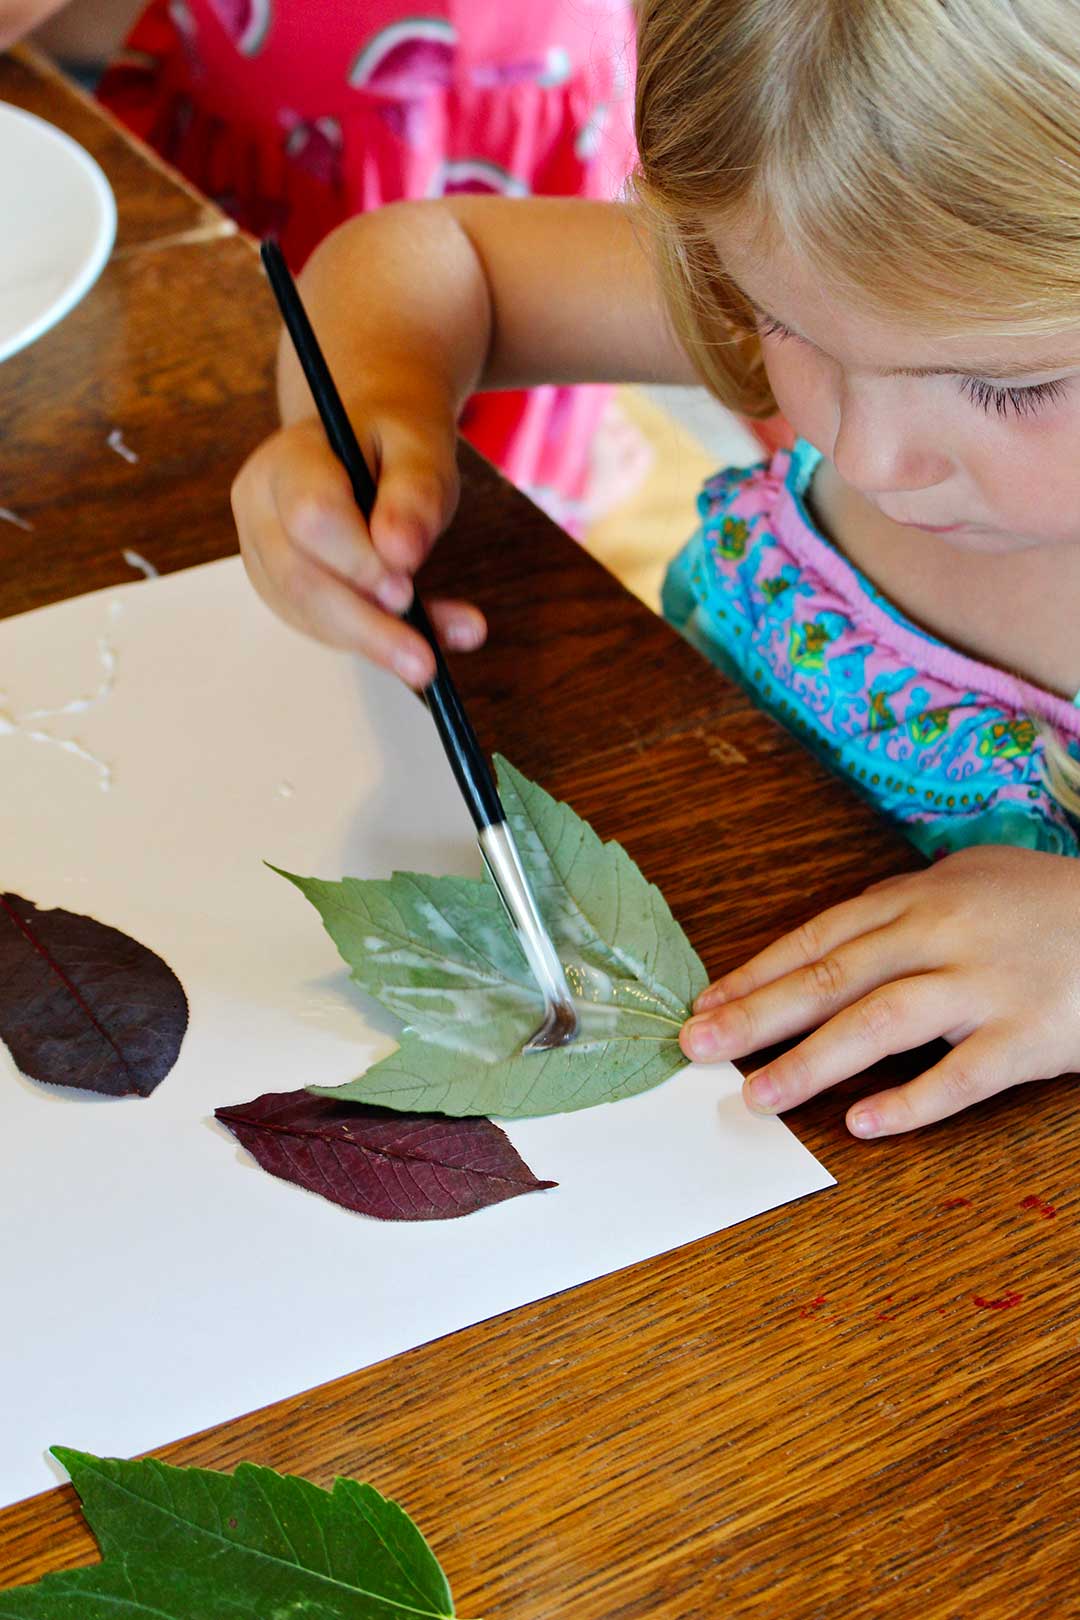 Girl with blonde hair painting the back of a leaf with paste for her leaf collage.